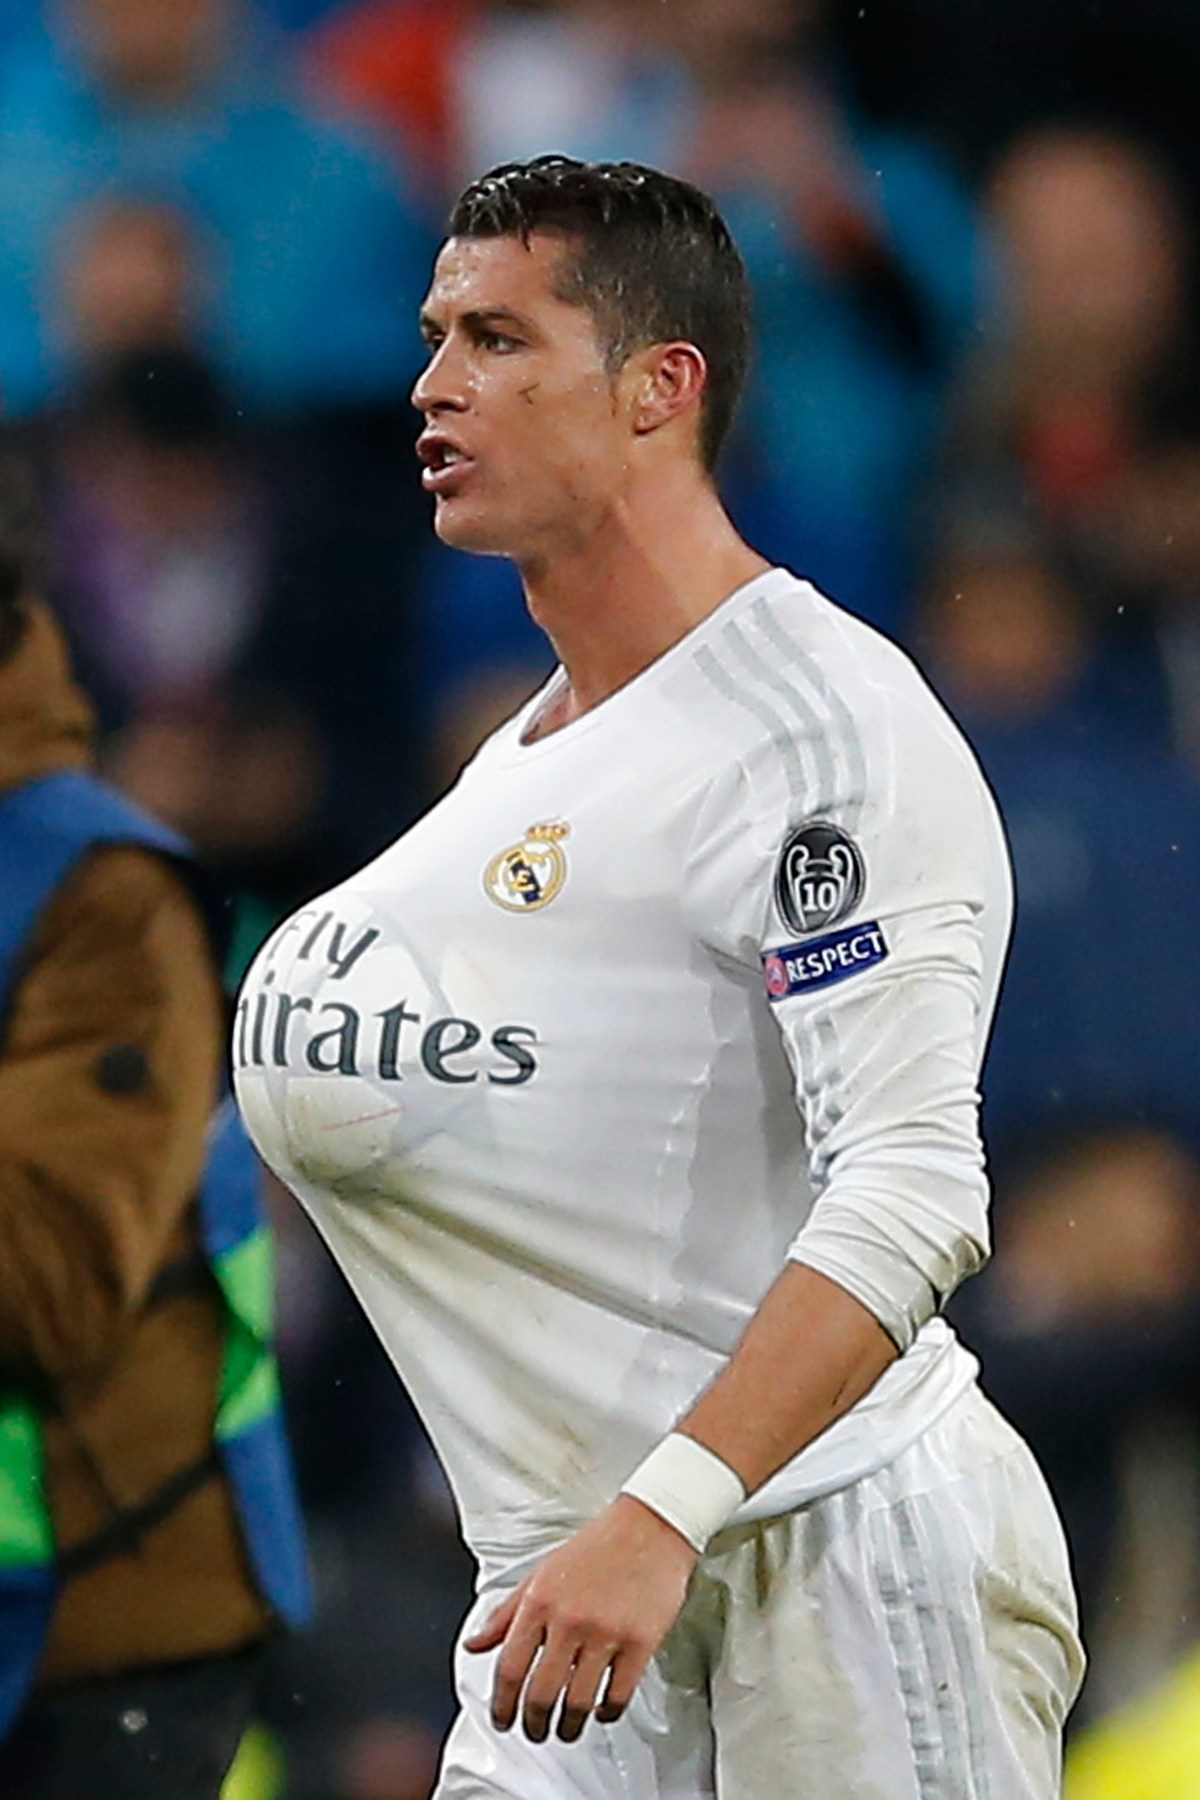 Real Madrid's Cristiano Ronaldo who scored three times walks on the pitch with the ball under his shirt after the Champions League 2nd leg quarterfinal soccer match between Real Madrid and VfL Wolfsburg at the Santiago Bernabeu stadium in Madrid, Spain, Tuesday April 12, 2016. (AP Photo/Paul White)